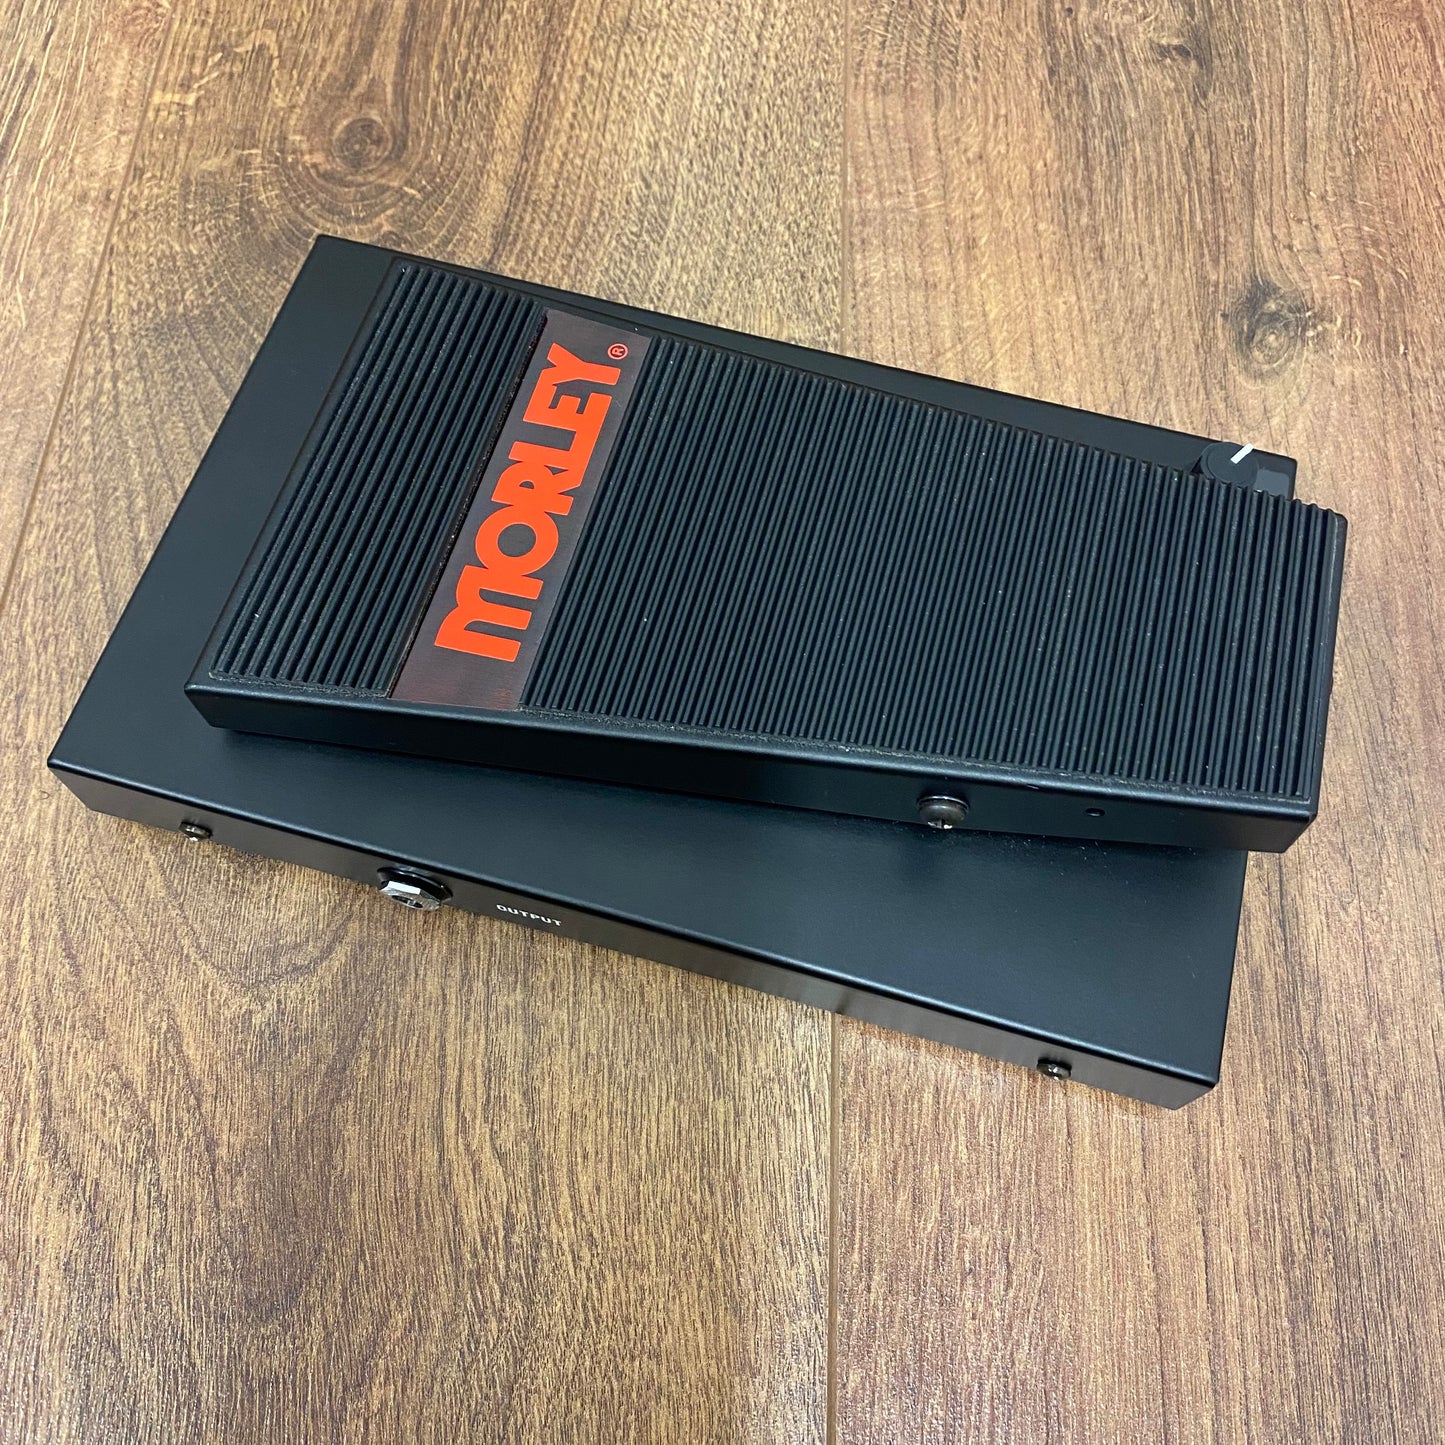 Pre-Owned Morley Pro Series PVO Volume Pedal